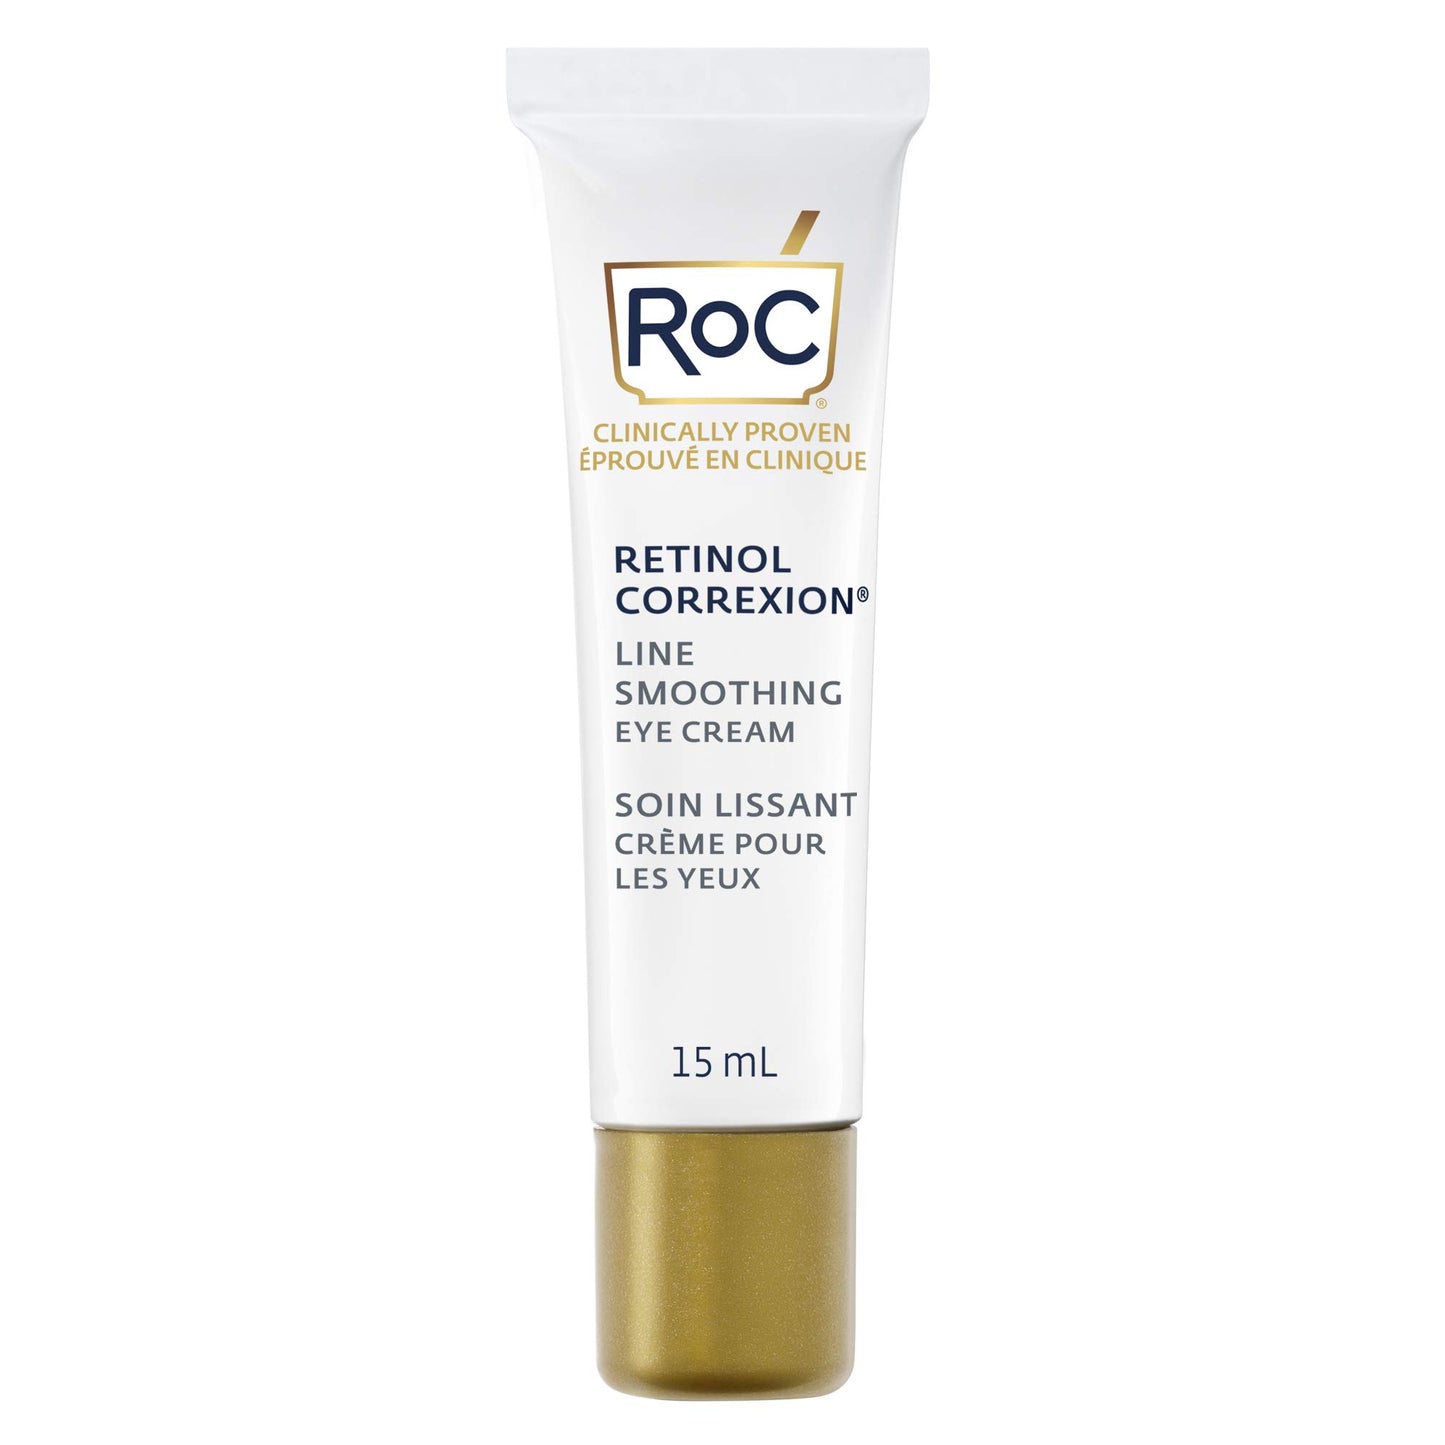 RoC Retinol Correxion®️ Under Eye Cream for Dark Circles & Puffiness, Daily Wrinkle Cream, Anti Aging Line Smoothing Skin Care Treatment, 15ML, White